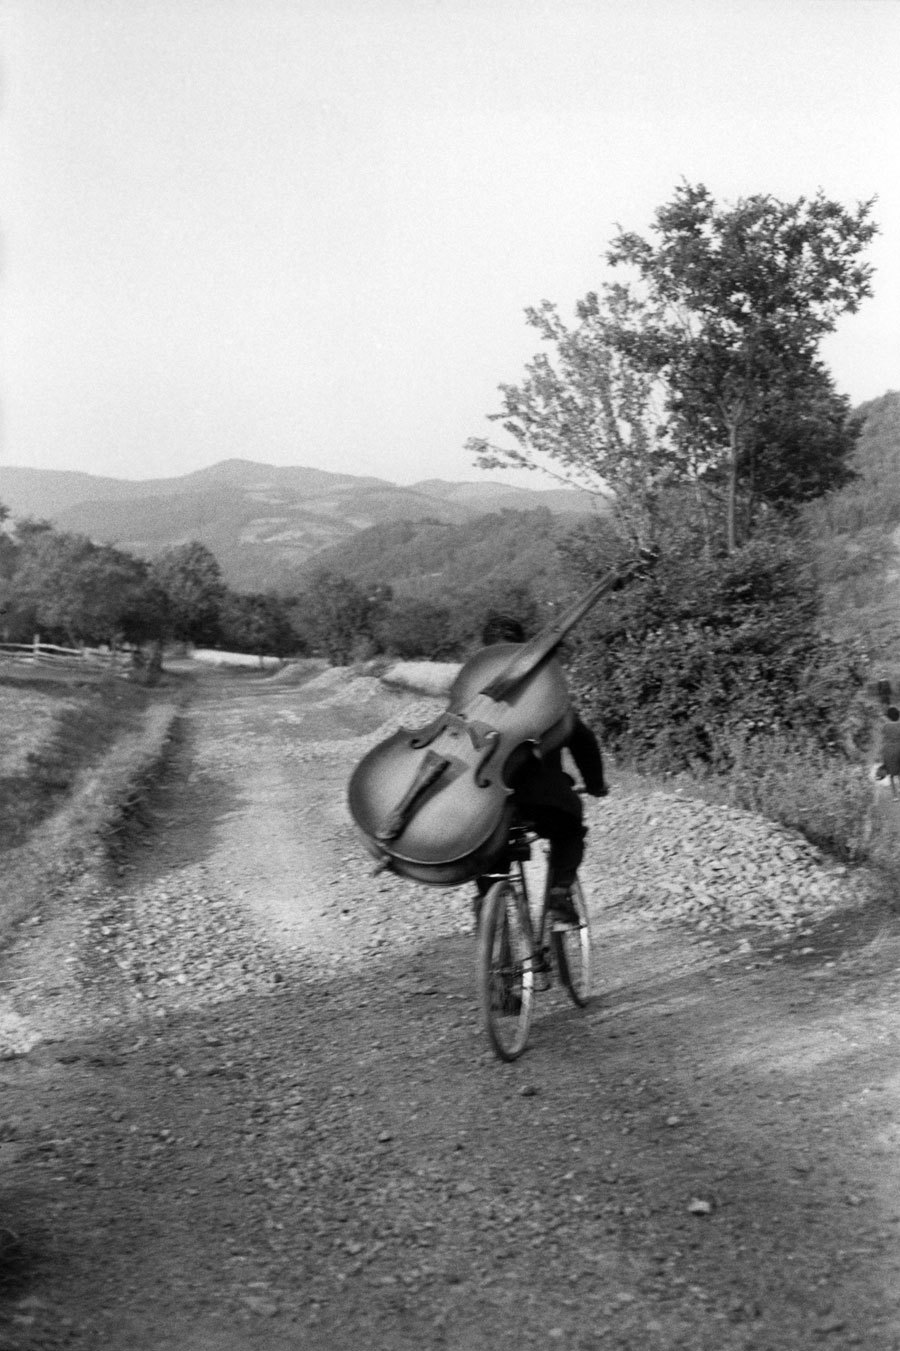 fewthistle:“ Serbia. Bass player on the way to play at a village festival. 1965Photographer: Henri Cartier-Bresson”